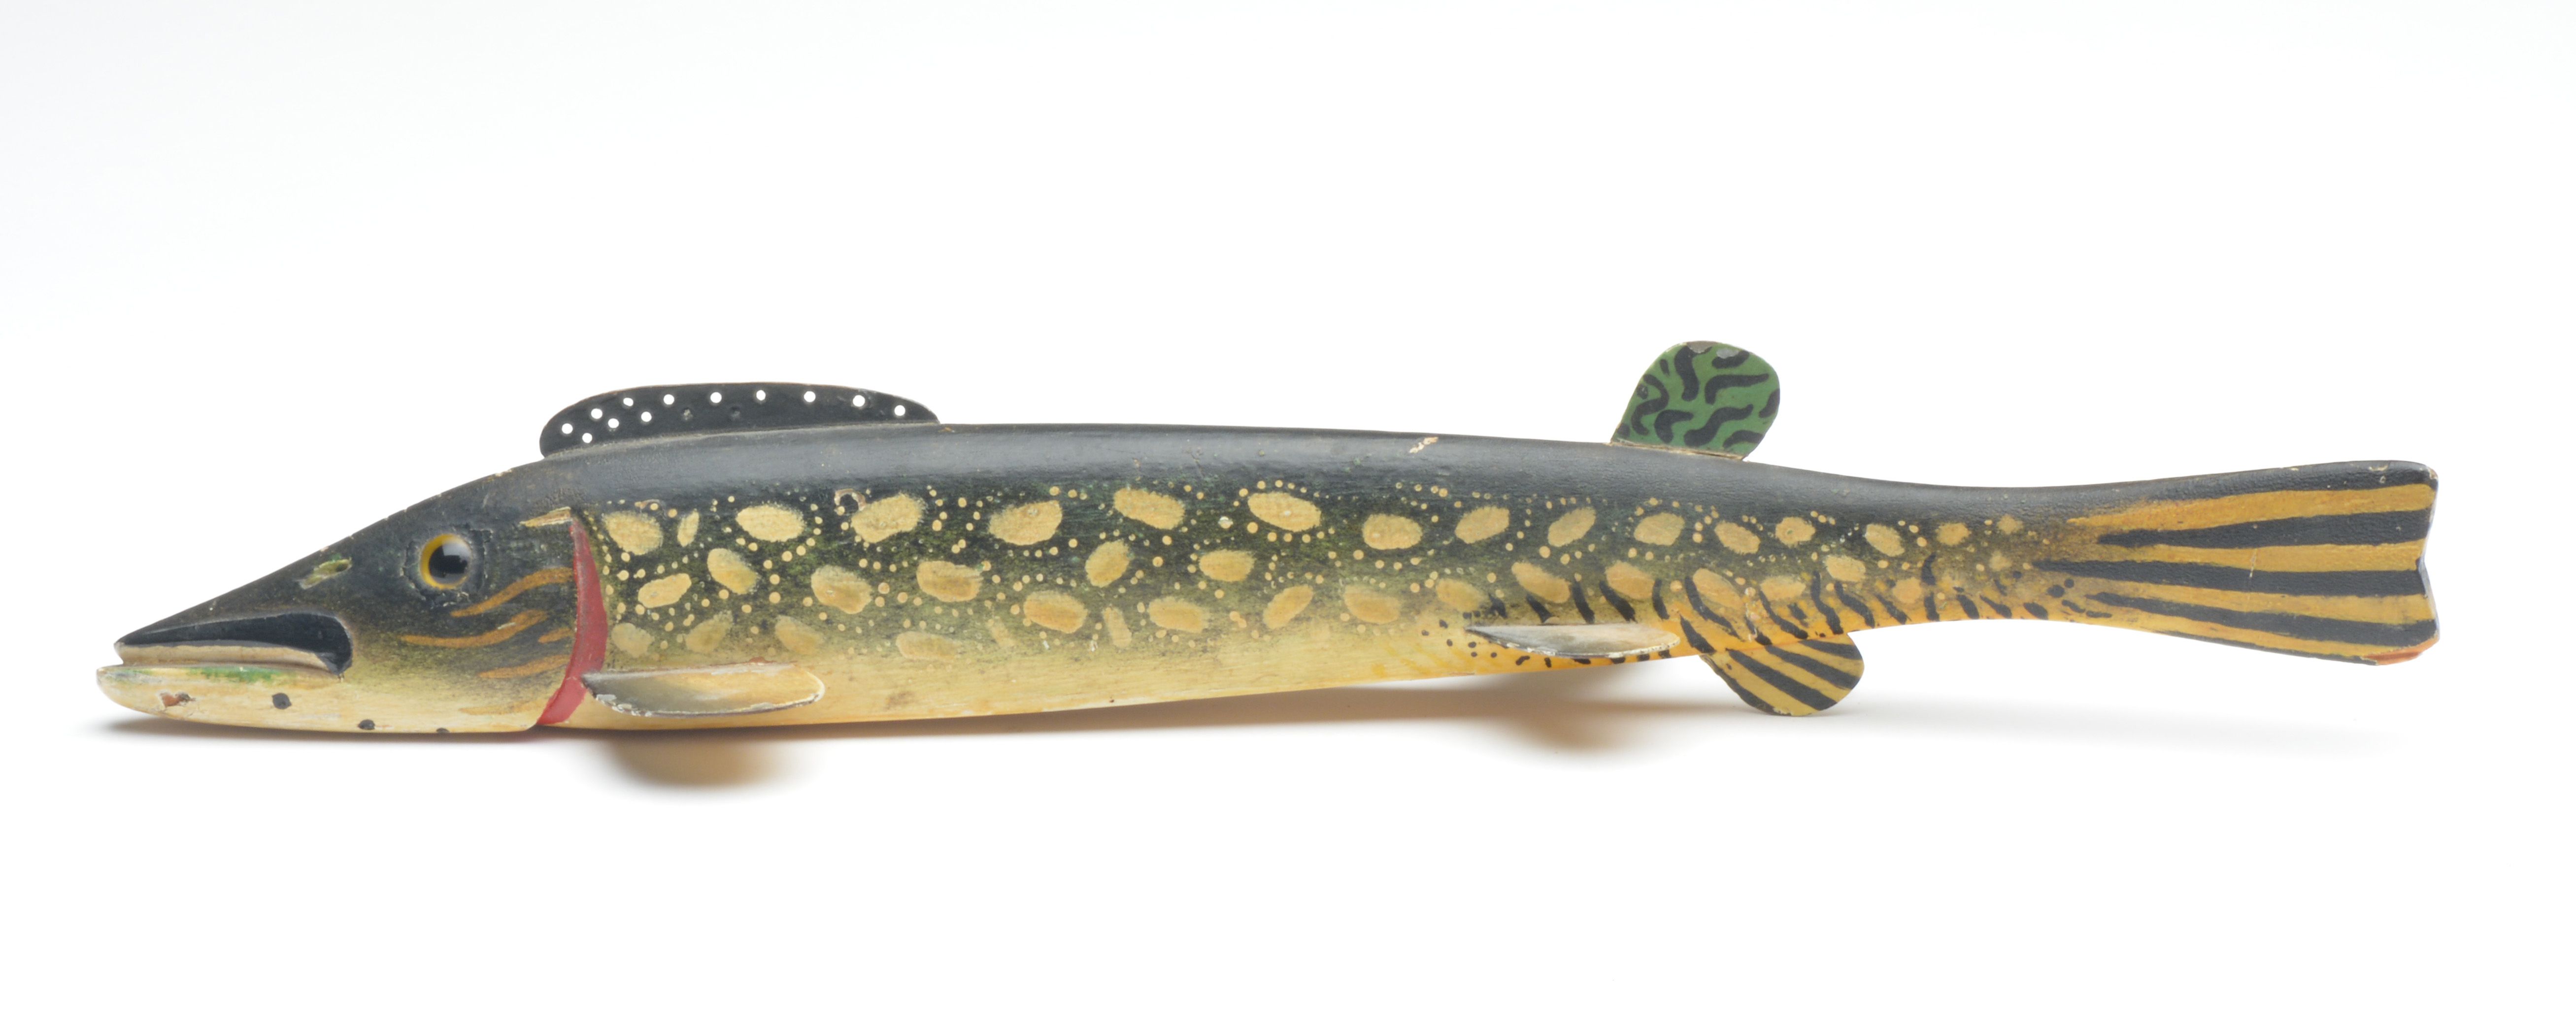 Fish decoy carved by Michigan artist in 1940 sells for record